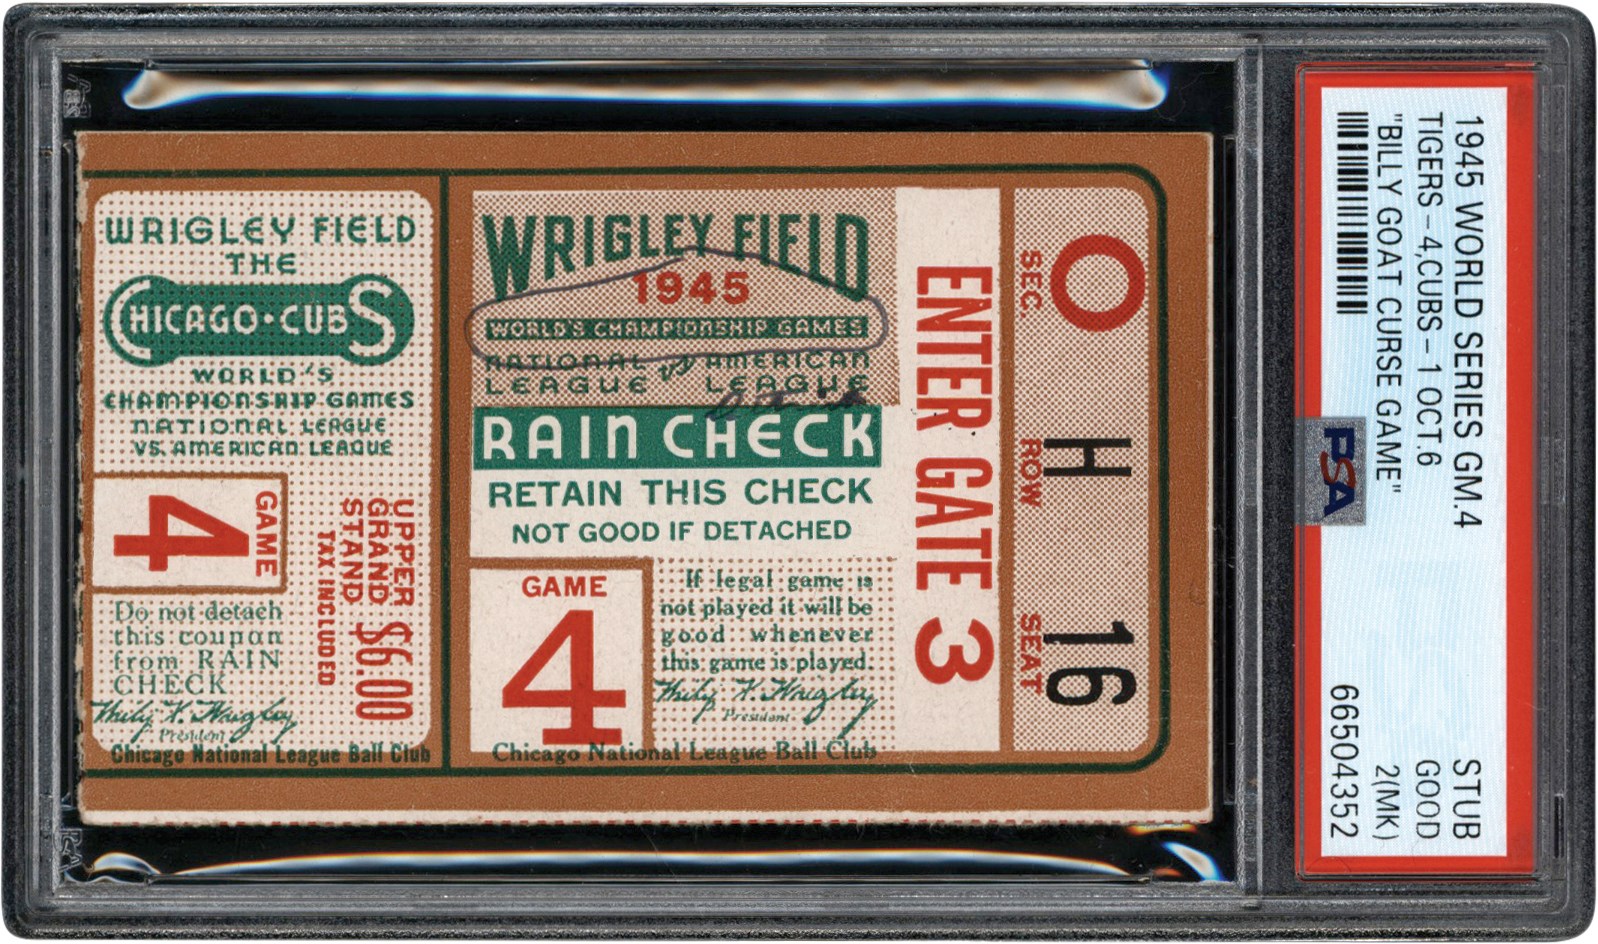 - 1945 World Series Game 4 Ticket Stub - Curse of the Billy Goat Game PSA GD 2 (MK)